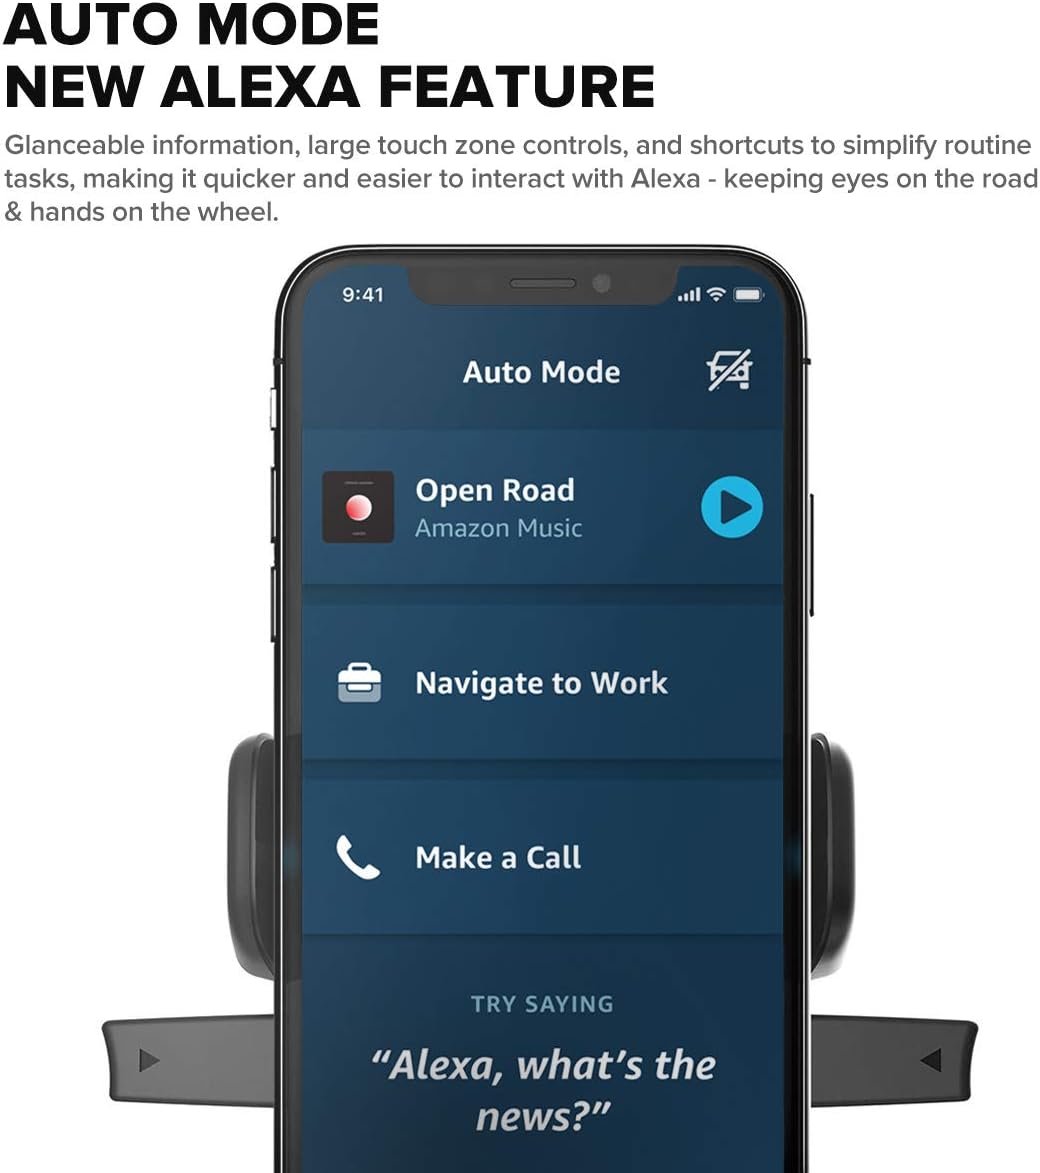 iOttie Easy One Touch Connect Pro (New) - Gen 2 - Hands Free Alexa in Your Car - Car Mount Phone Holder with Alexa Built in for iOS & Android, MFi Certified, Universal